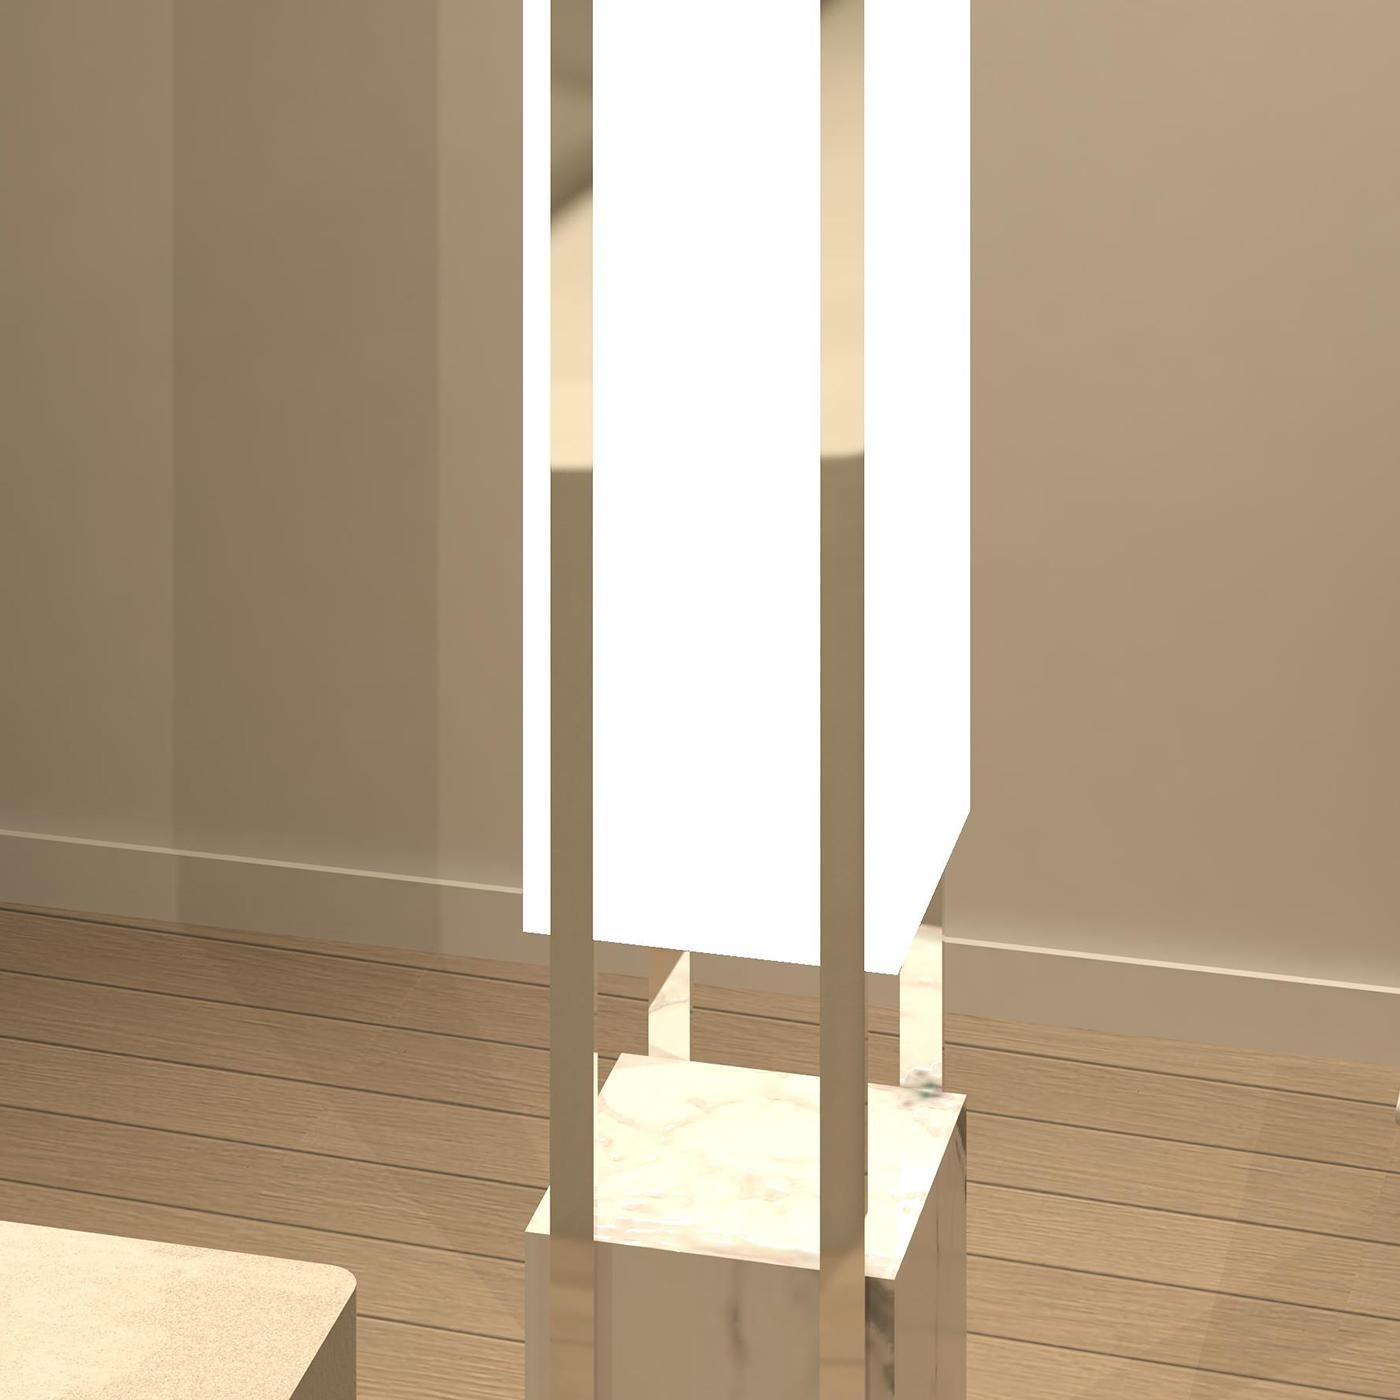 Italian TOTEM Suitcase Floor Lamp with White Carrara Marble Base by Vincenzo Bafunno